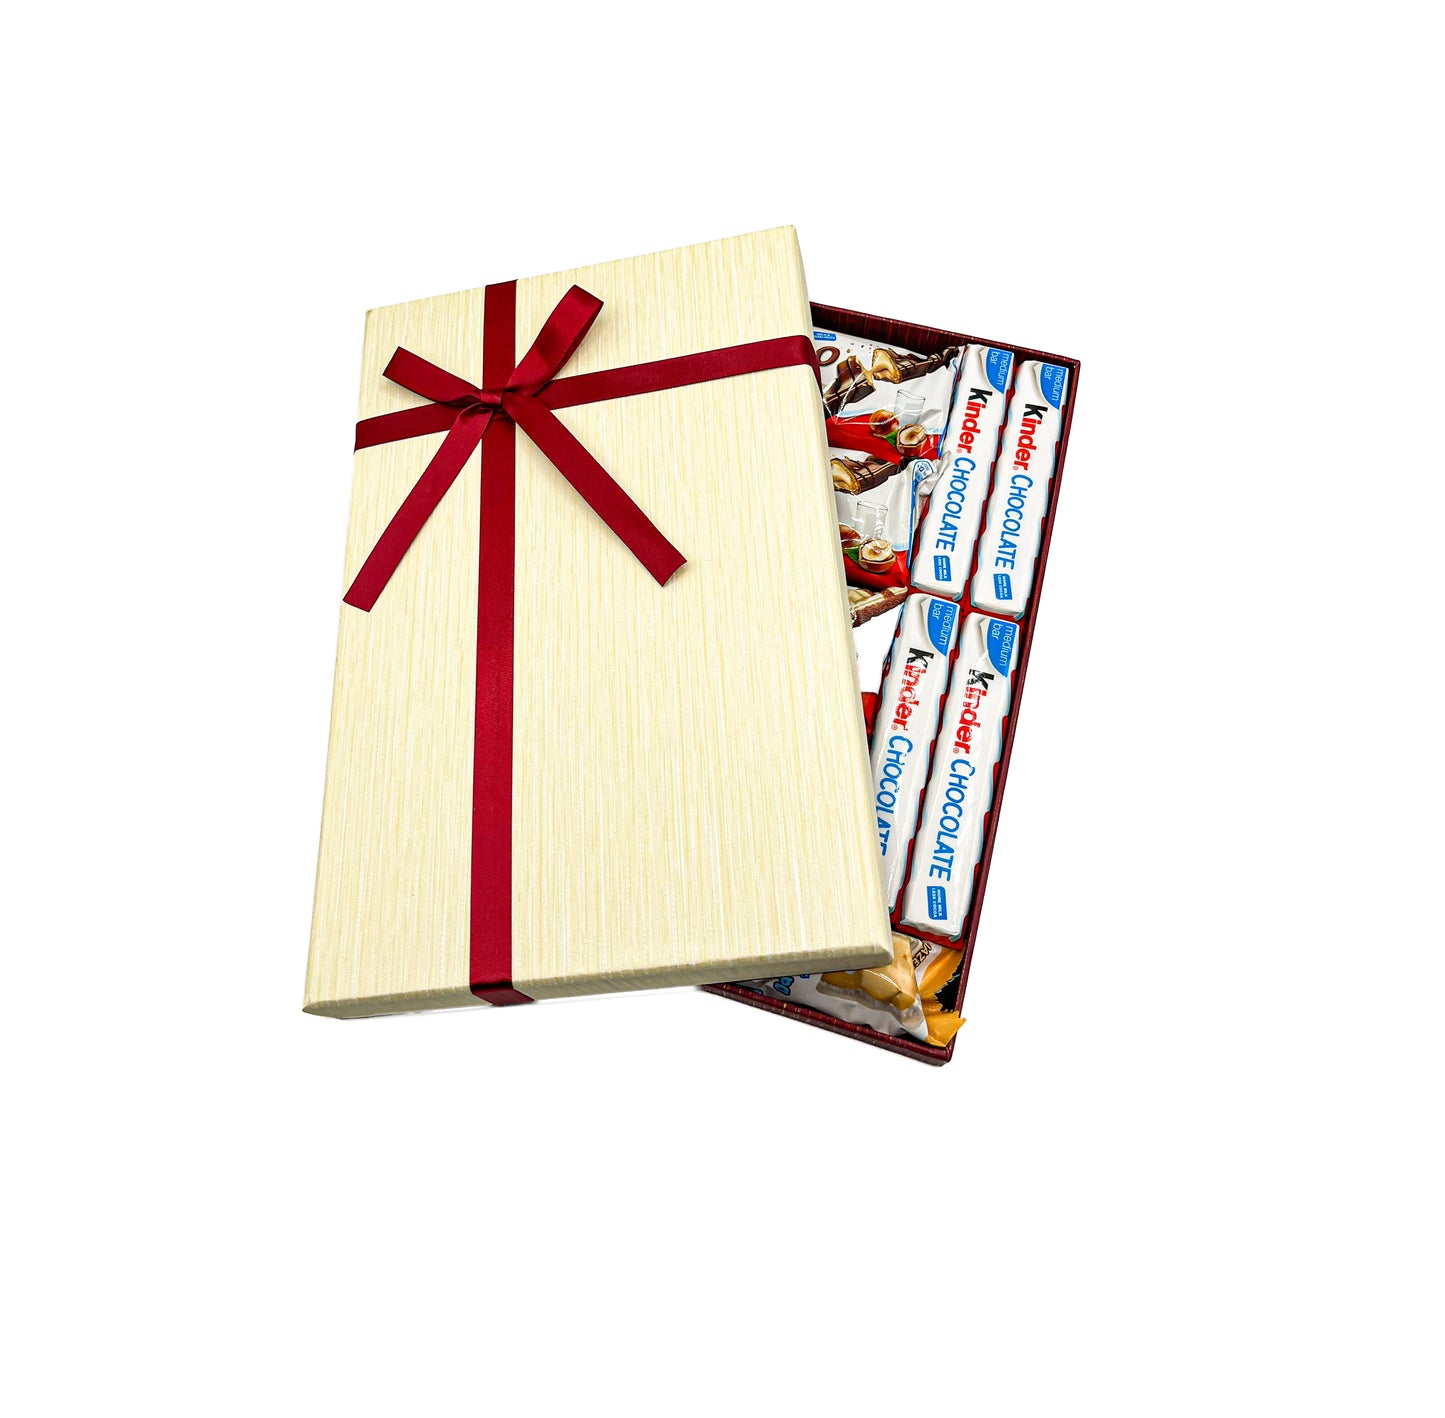 Kinder Bueno Chocolate Box Gift for All Occasions Celebration Gift Hamper - 15 Chocolates